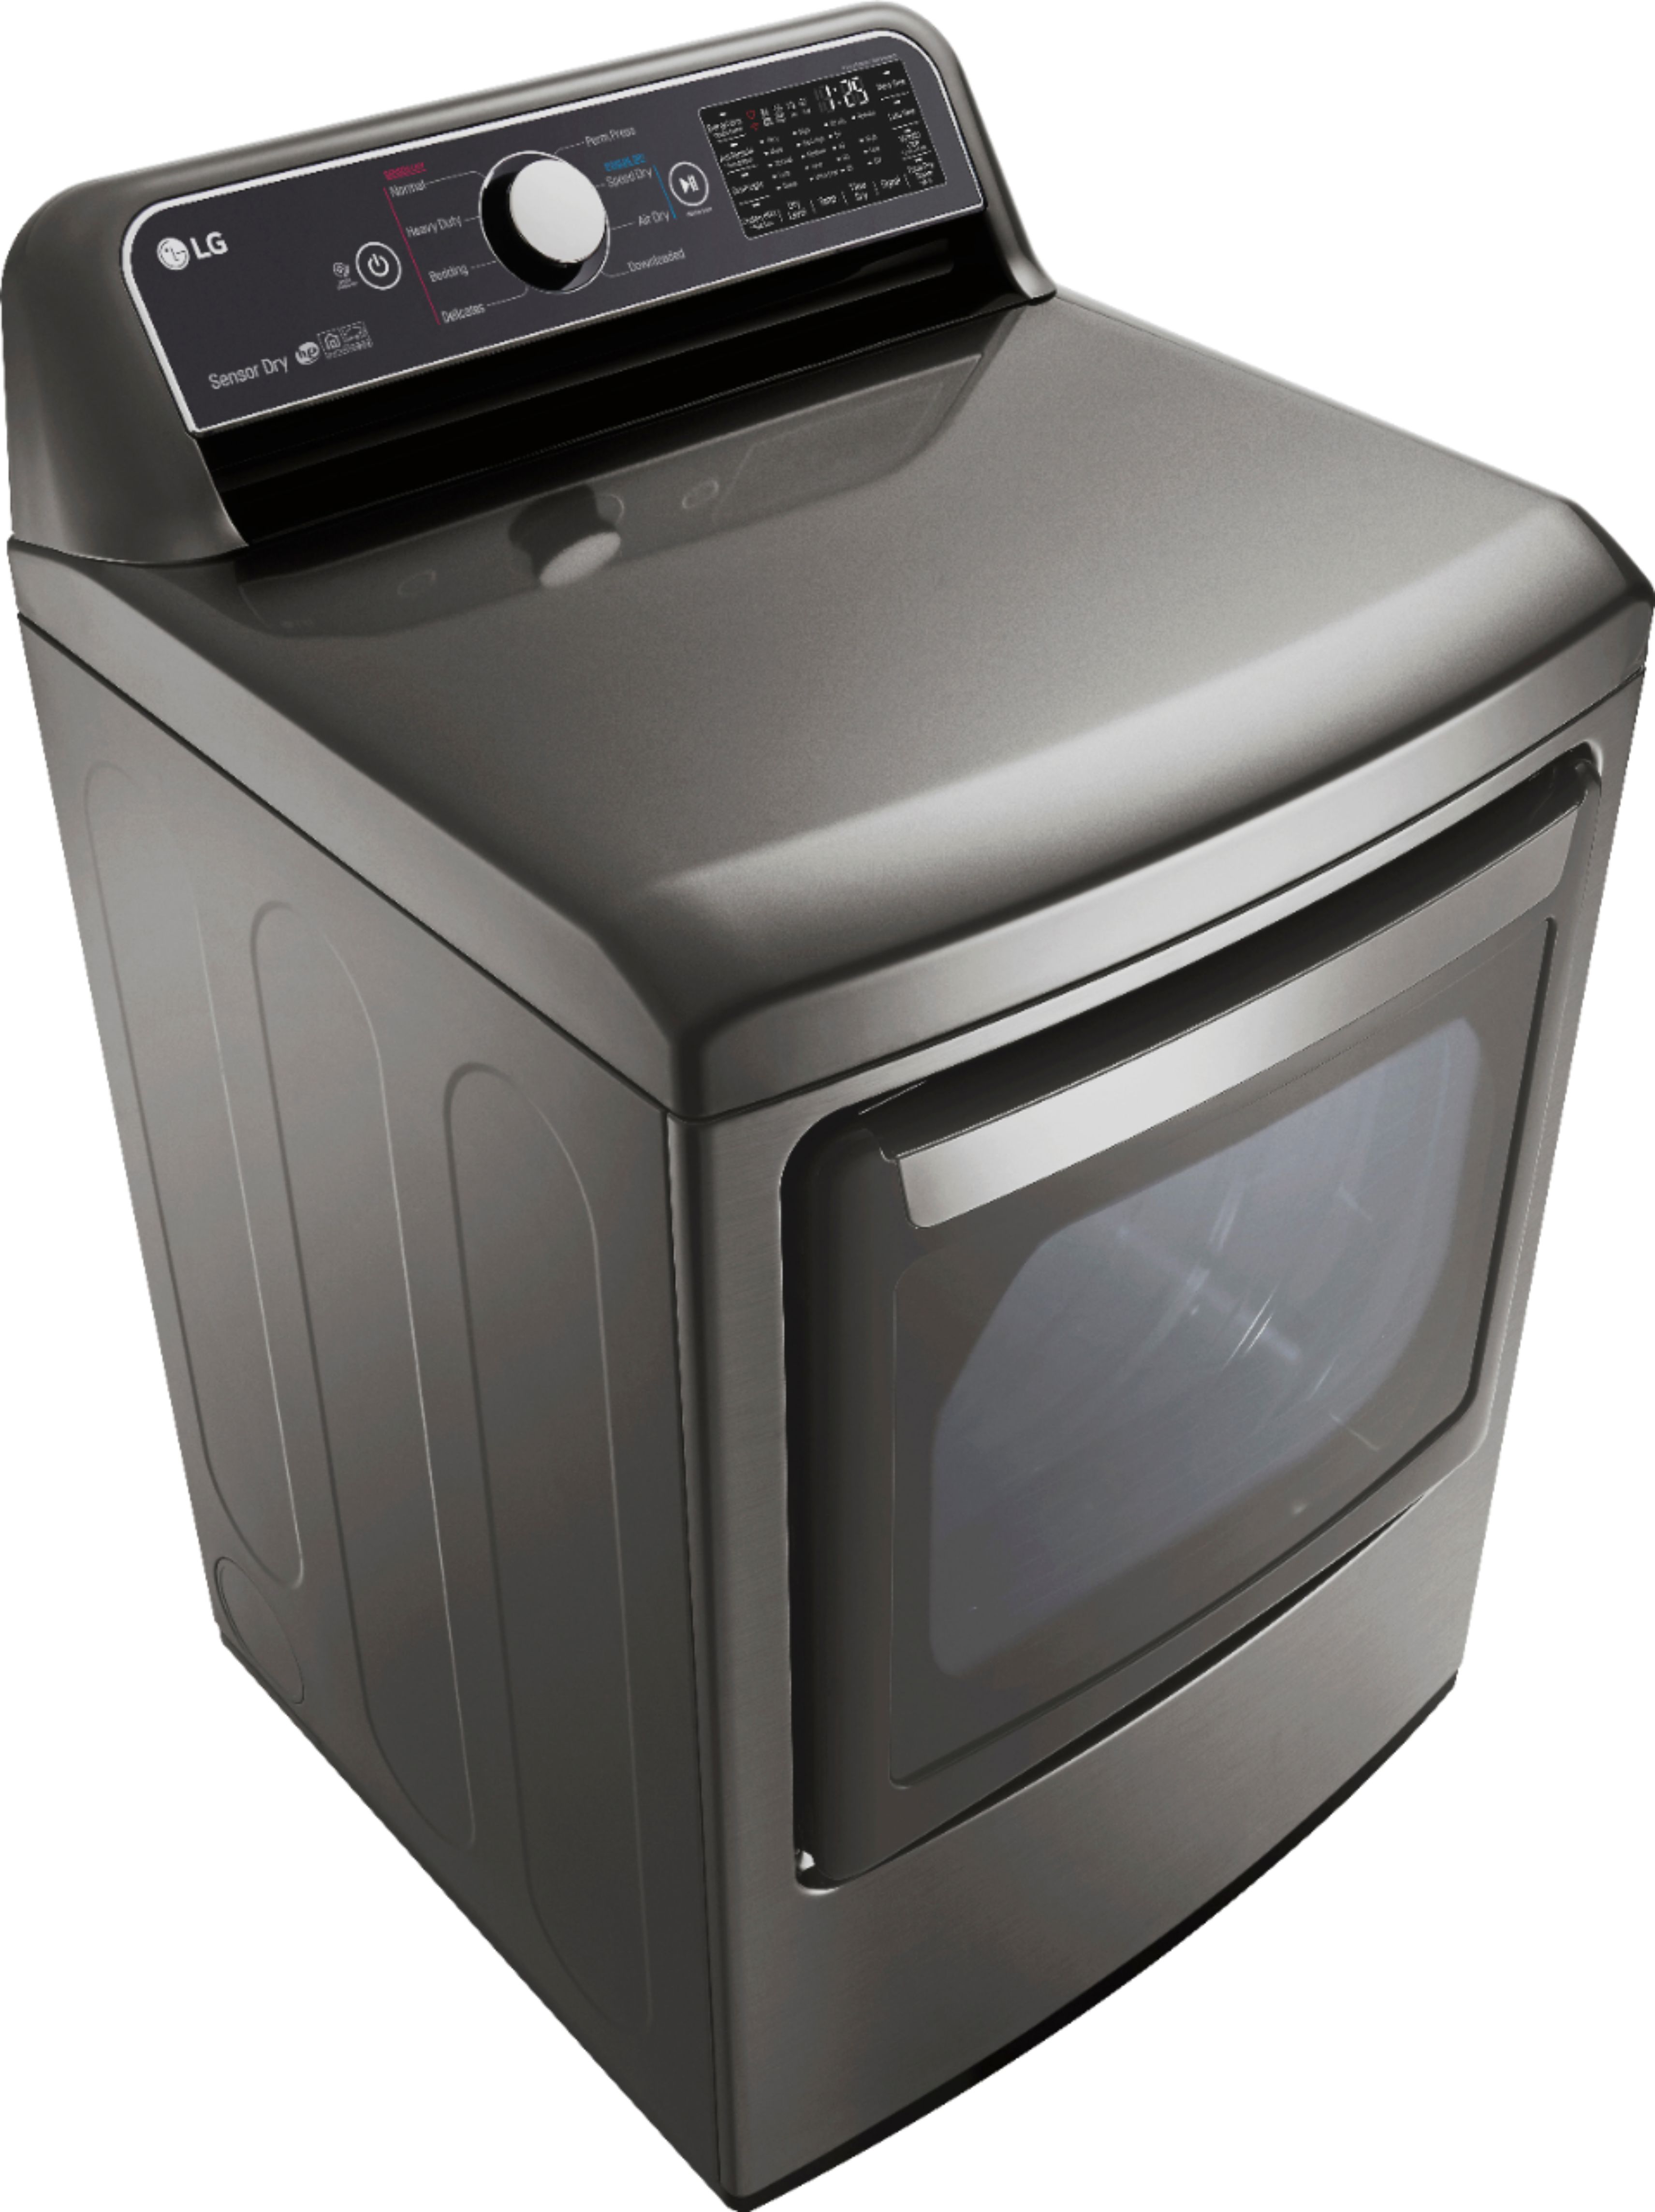 Angle View: LG - 7.3 Cu. Ft. Smart Electric Dryer with Sensor Dry - Graphite Steel